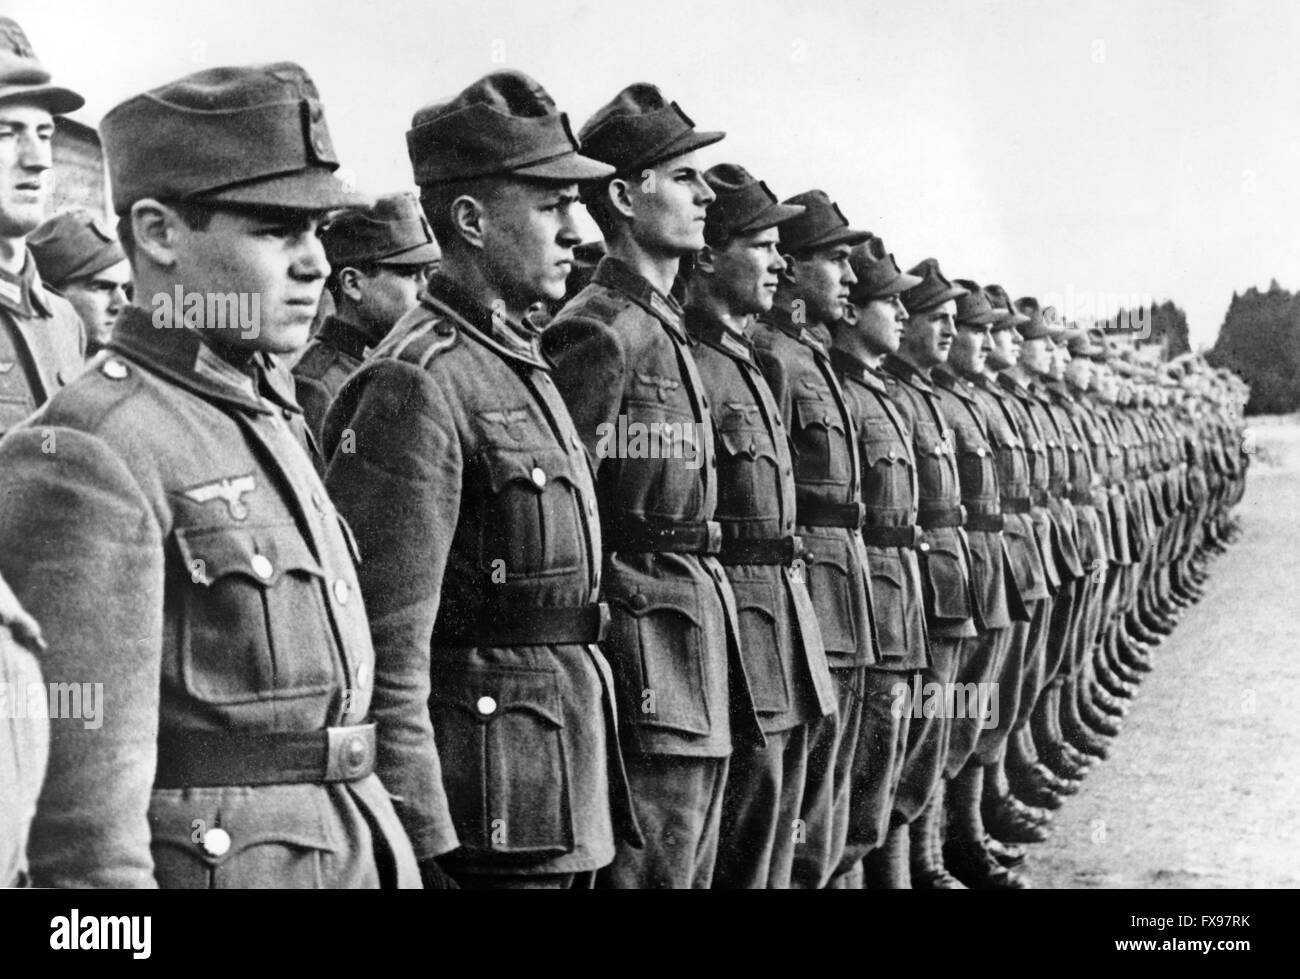 The Nazi propaganda image depicts Croatian volunteers in training for the German Wehrmacht. The photo was taken in January 1942. Location unknown. Fotoarchiv für Zeitgeschichtee - NO WIRE SERVICE - Stock Photo